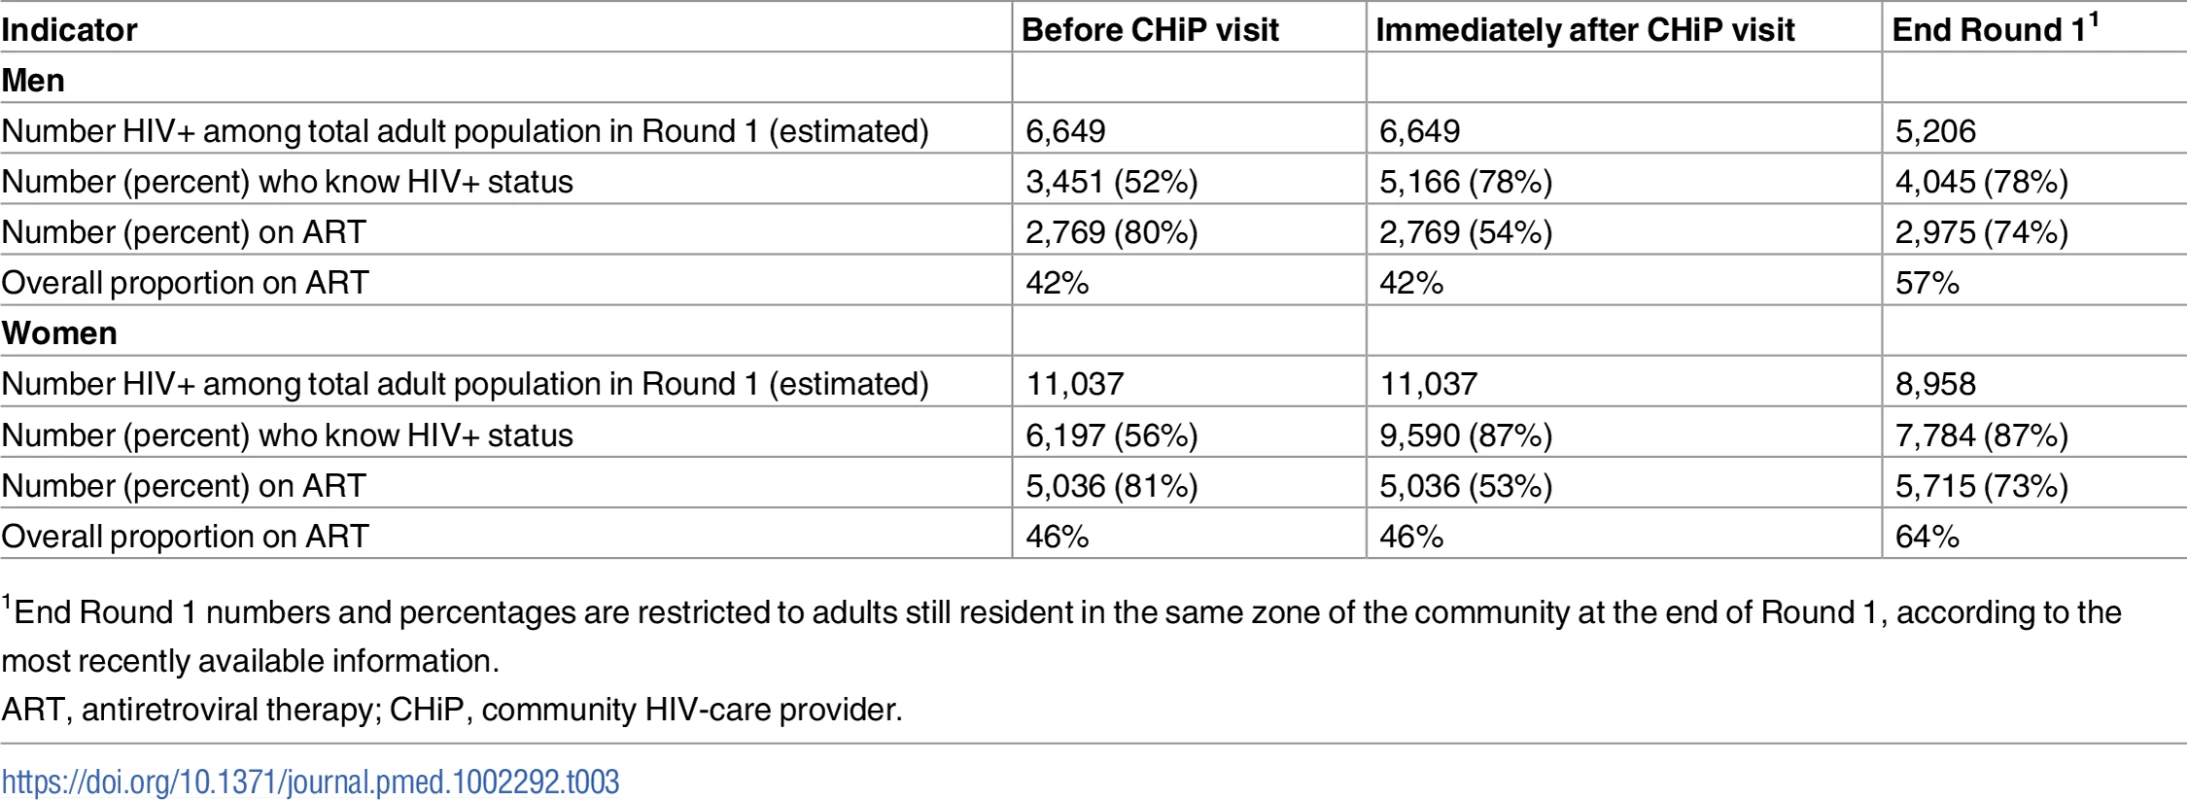 Estimated proportions of HIV+ individuals who knew their status and who were on ART before the CHiP visit, immediately after the CHiP visit, and at the end of Round 1, in total adult population.